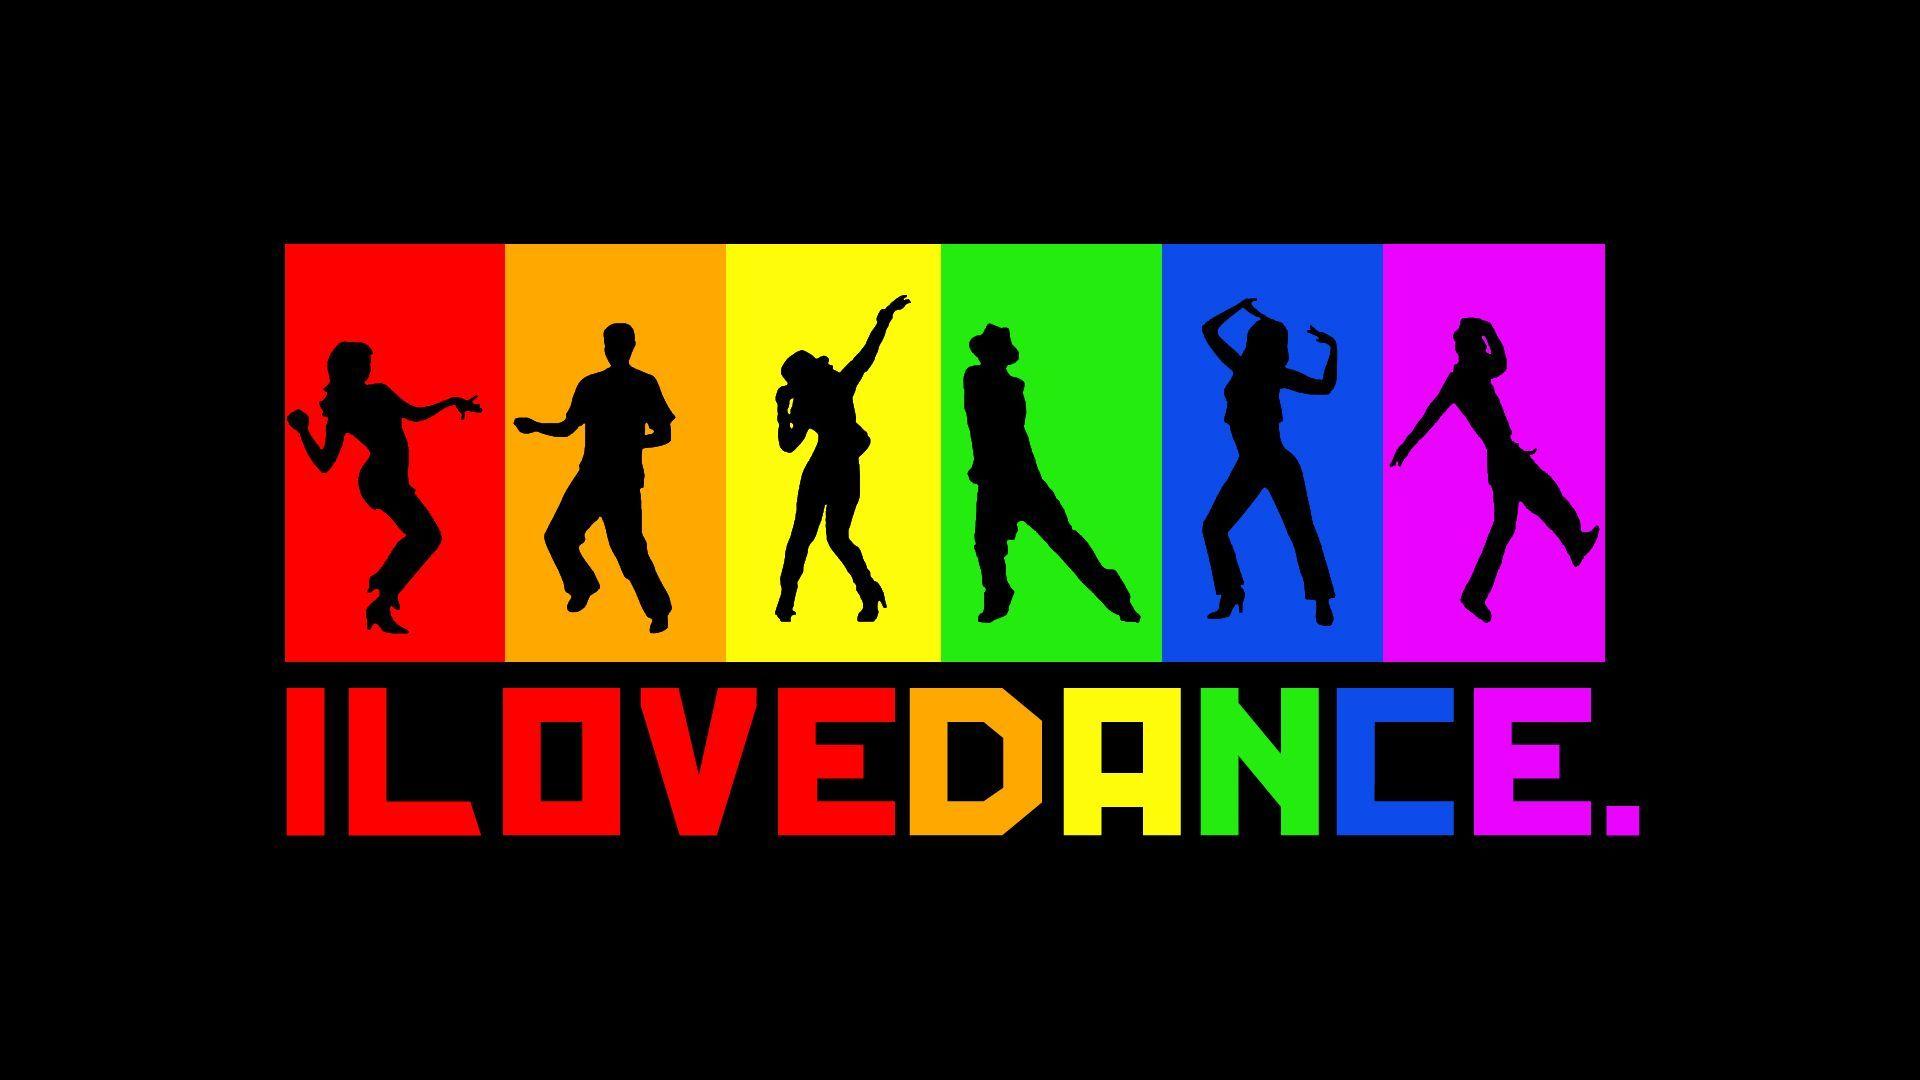 I Love Dance. HD Dance and Music Wallpaper for Mobile and Desktop